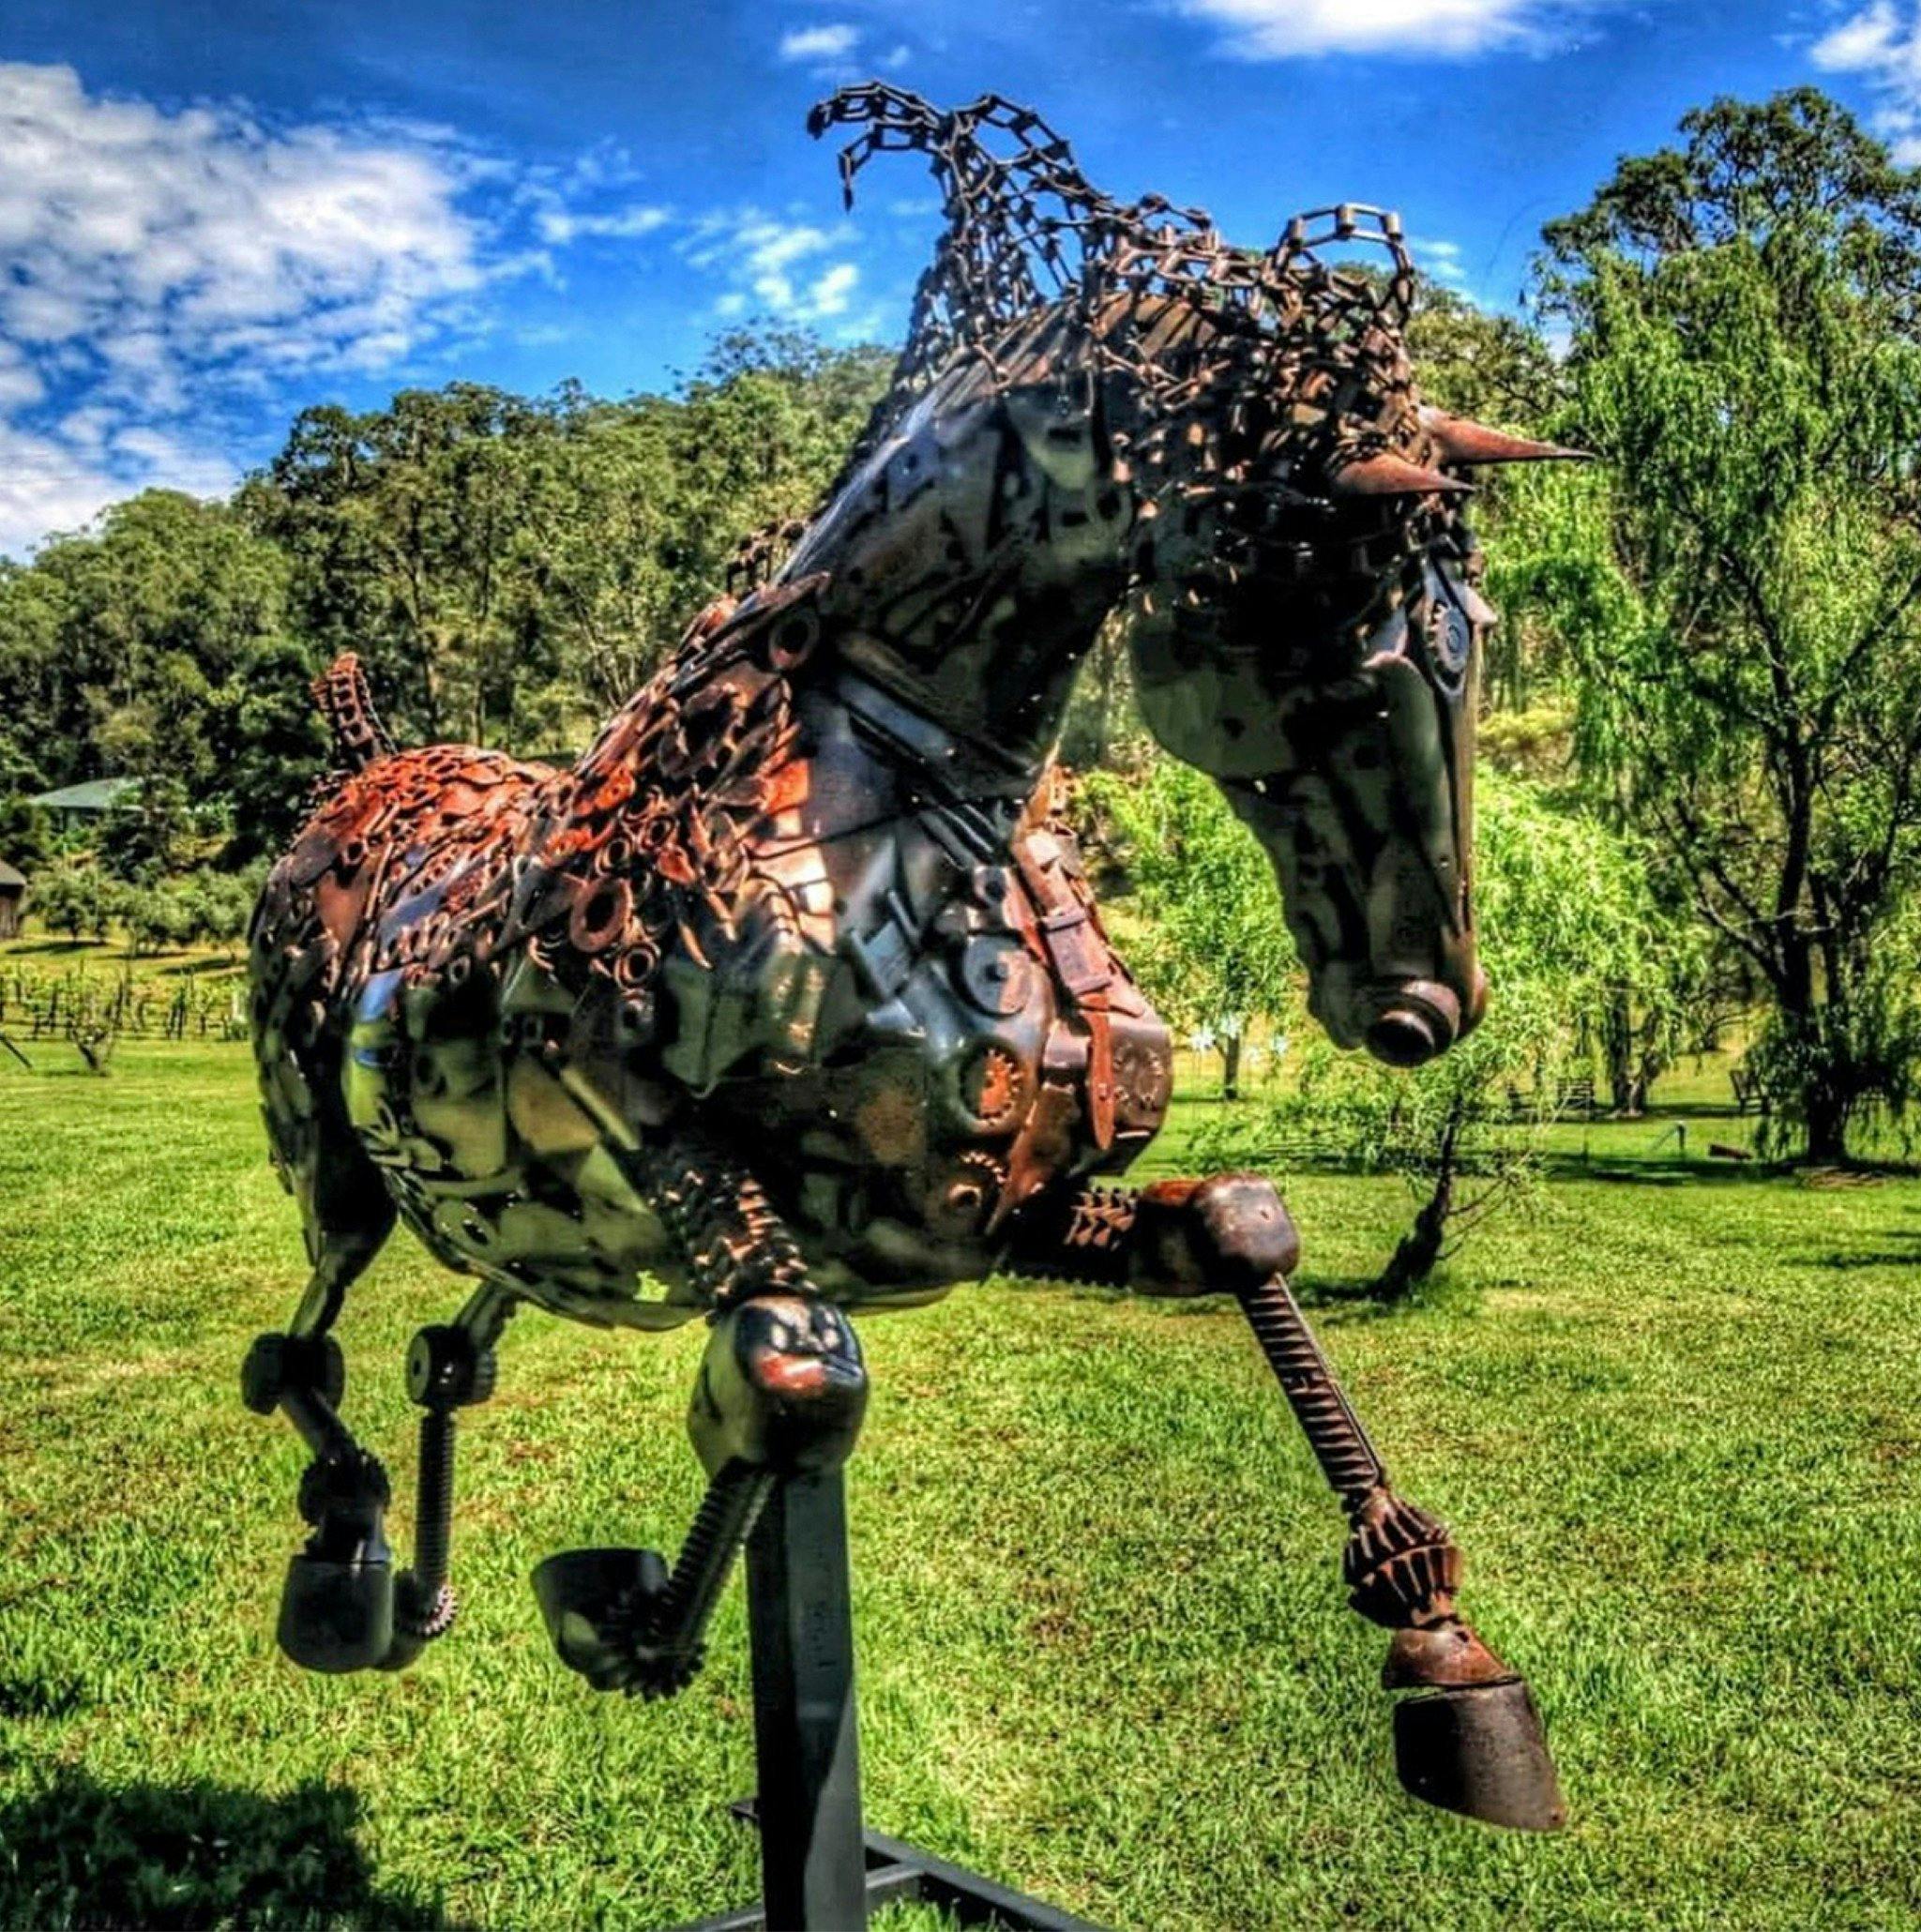 Sculpture in the Vineyards Wollombi Valley Sculpture Festival | NSW